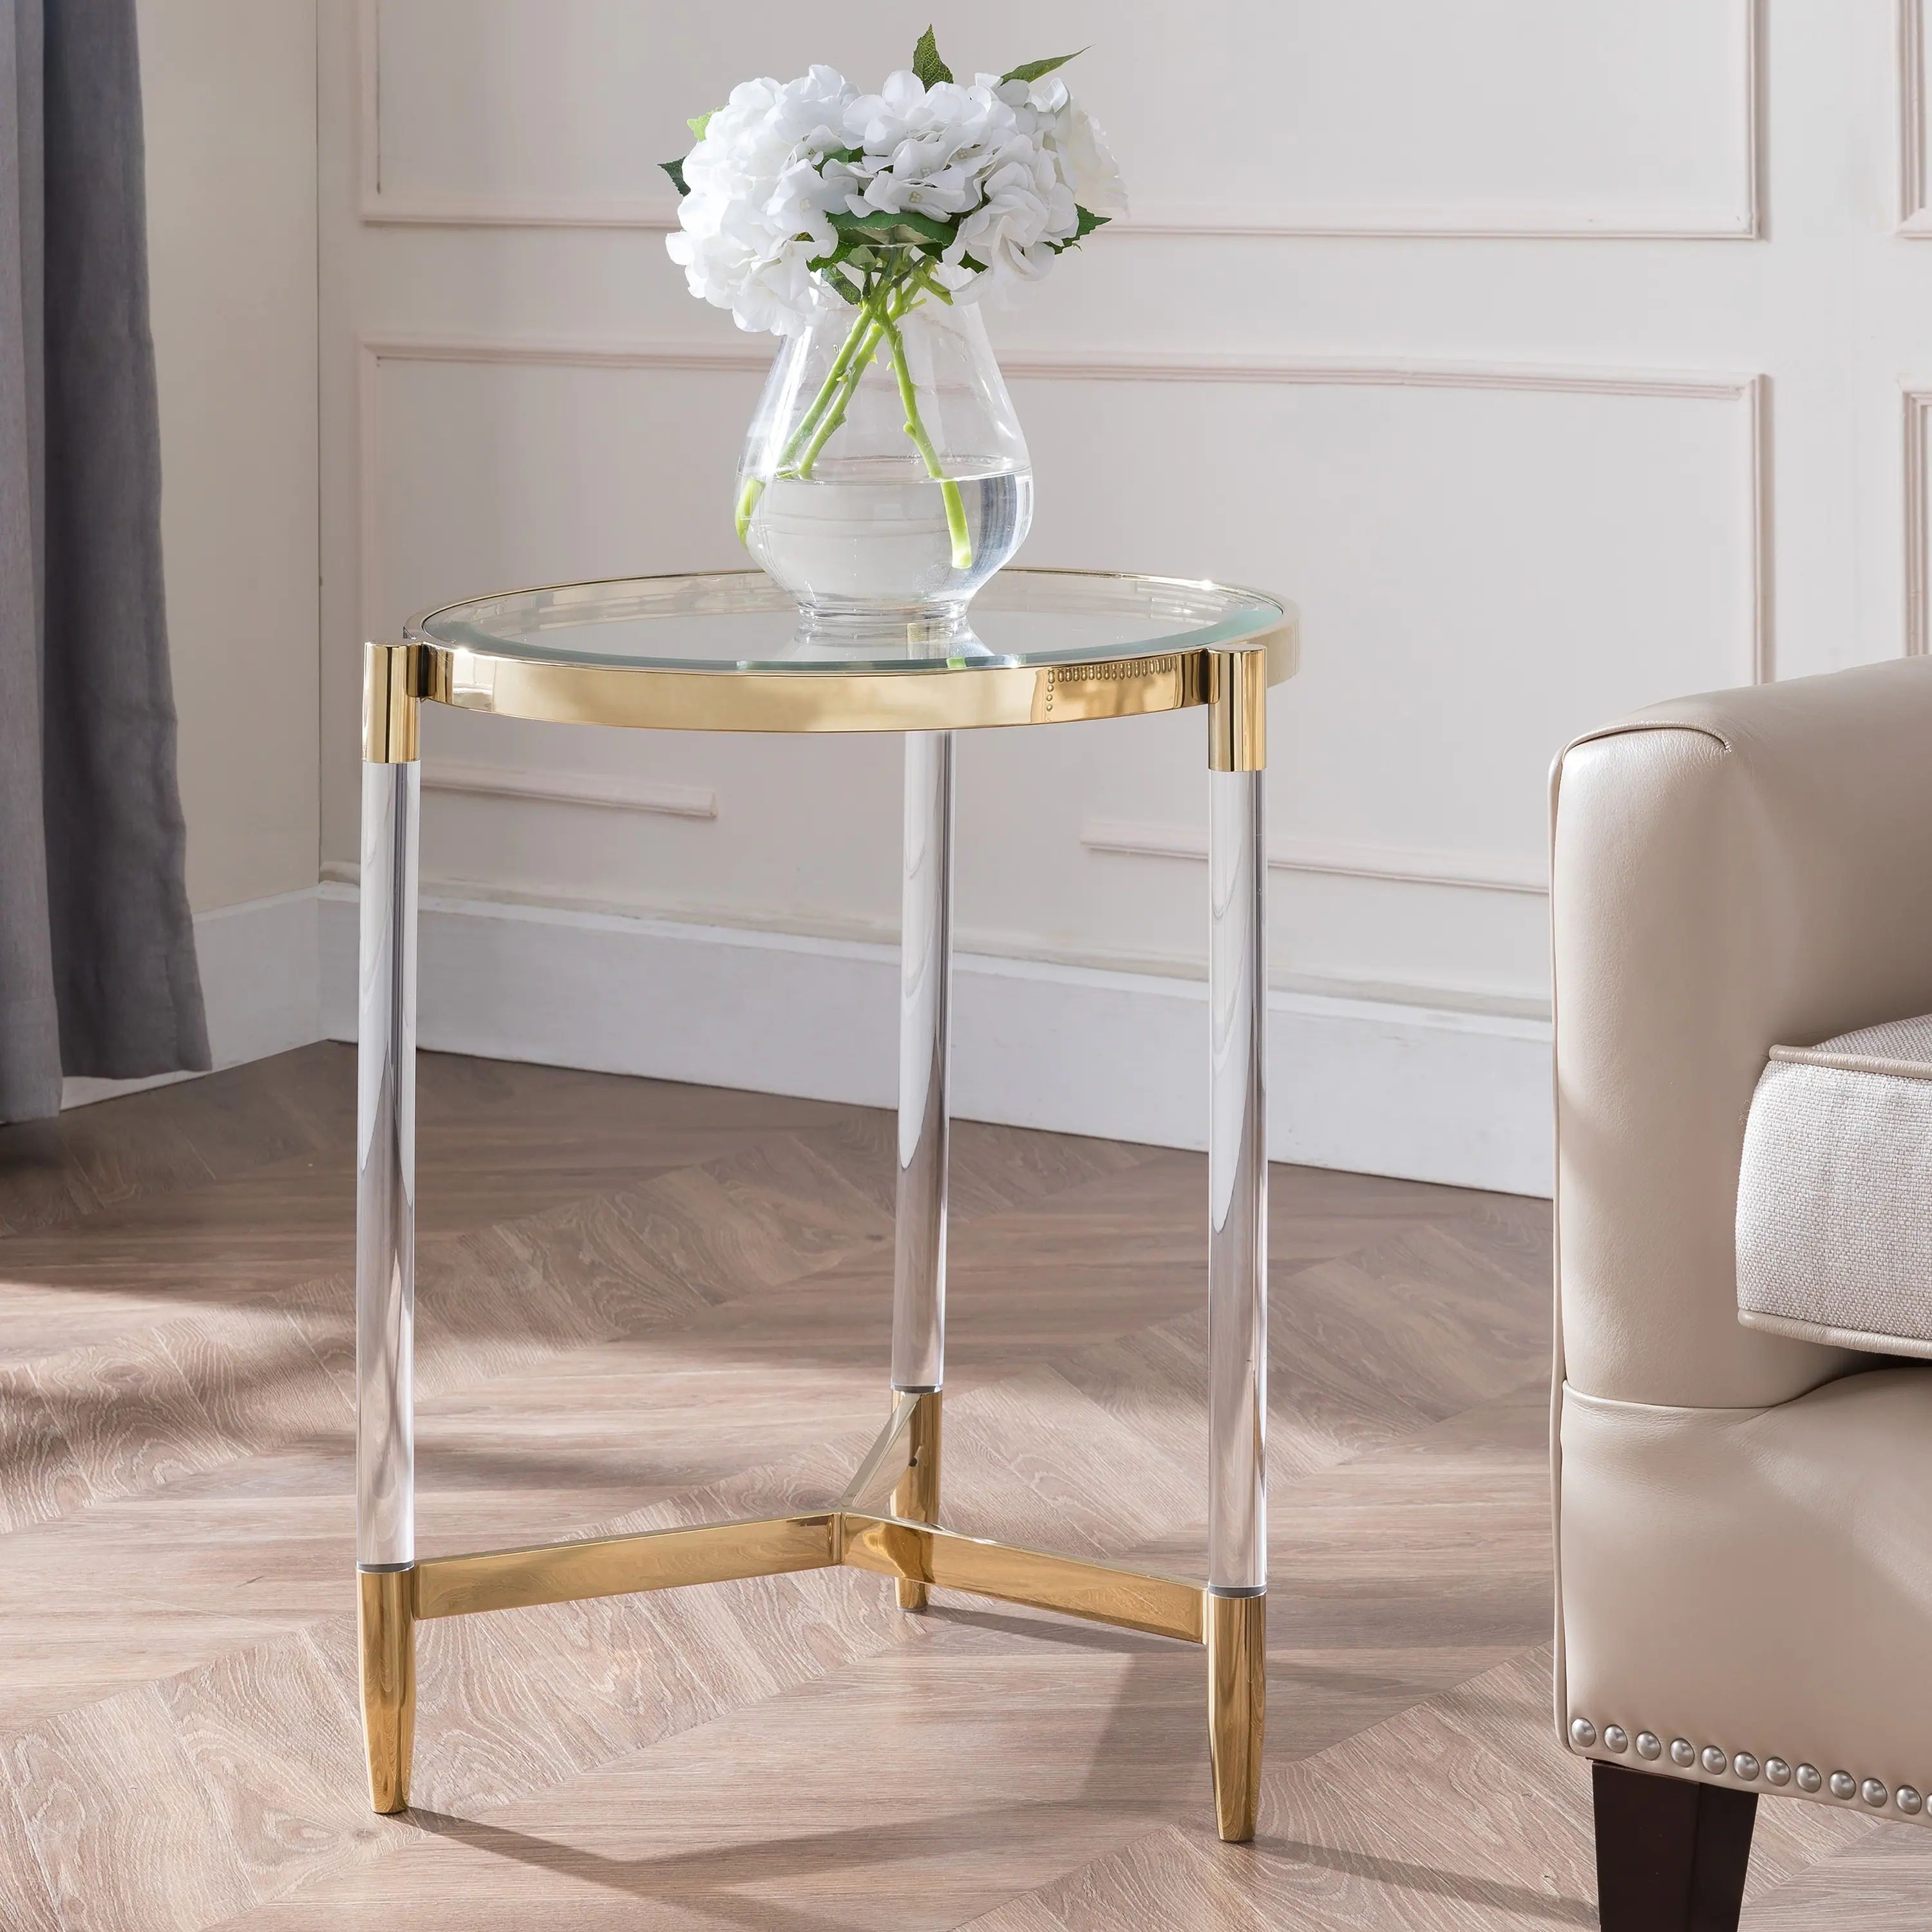 Silver Orchid Henderson Acrylic End Table | Bed Bath & Beyond